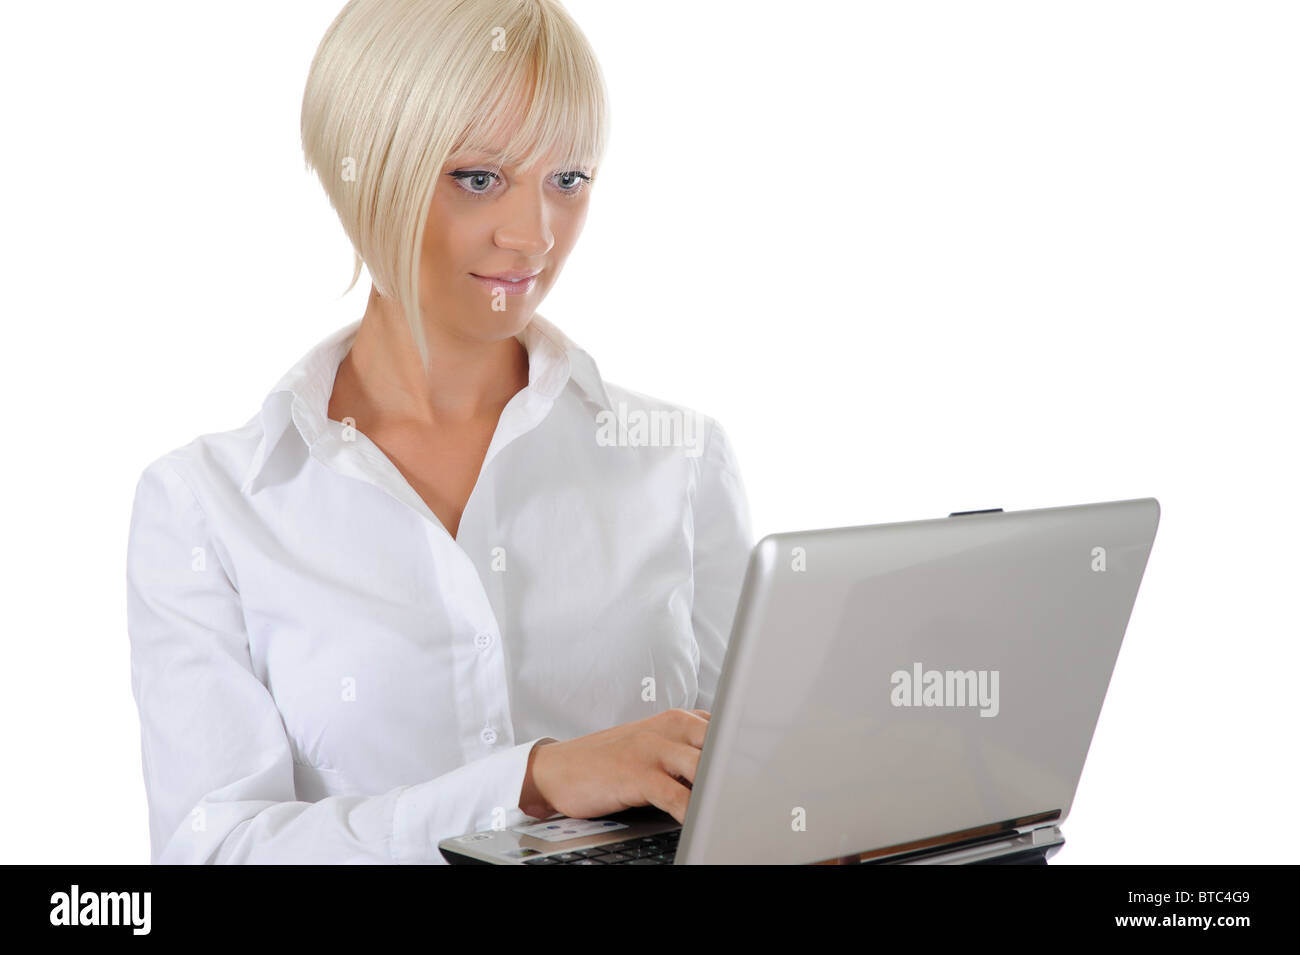 woman with a laptop. Stock Photo